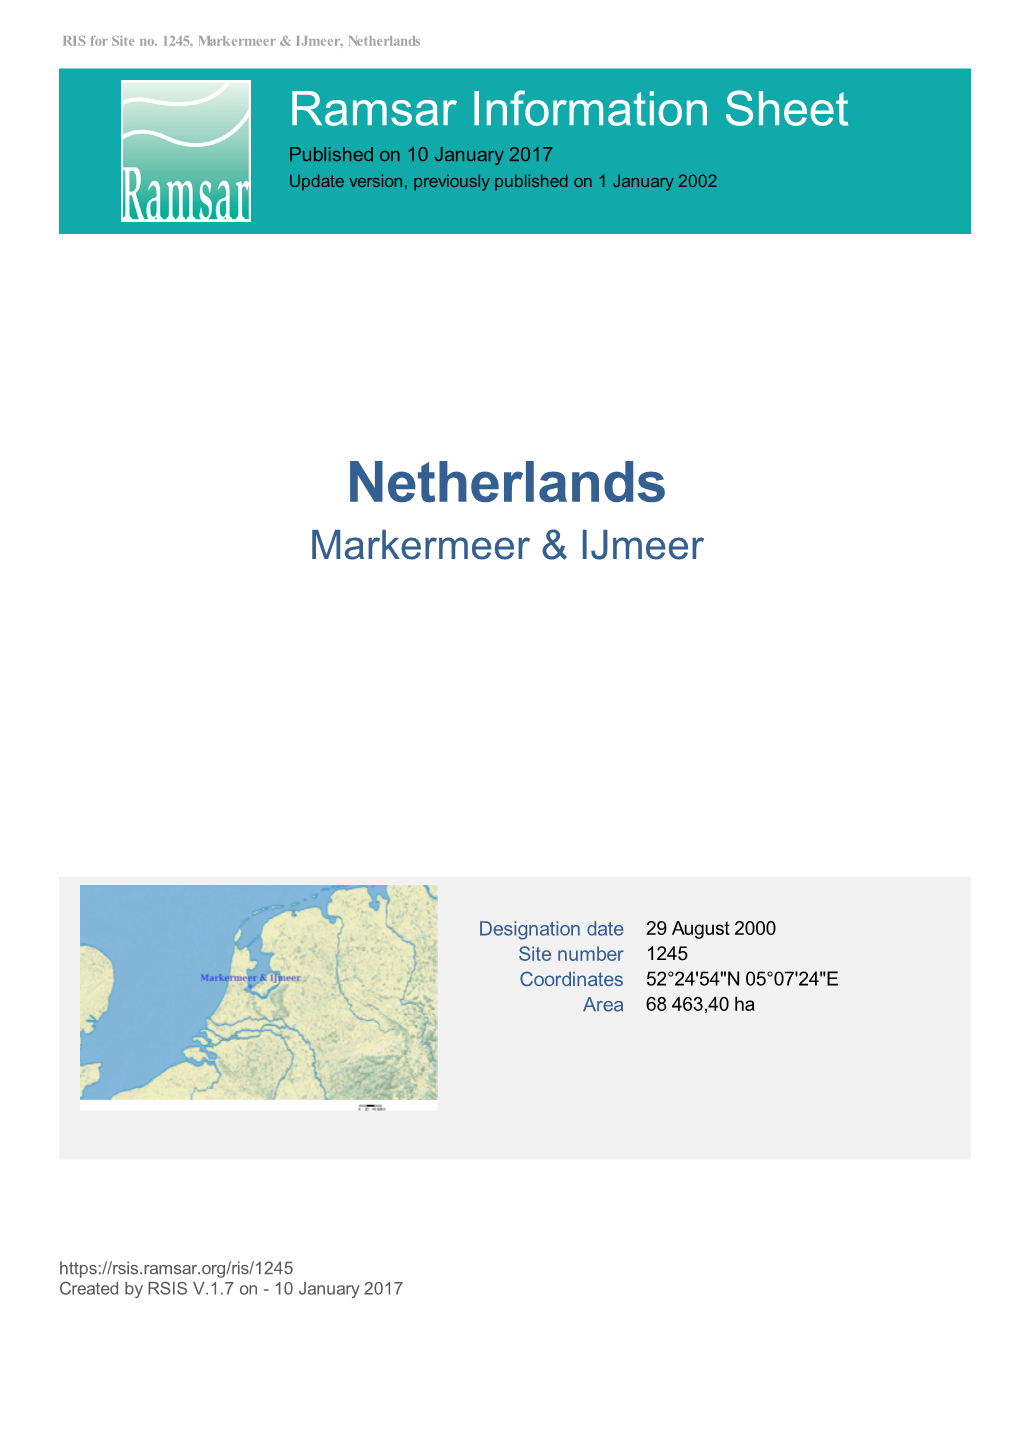 Netherlands Ramsar Information Sheet Published on 10 January 2017 Update Version, Previously Published on 1 January 2002